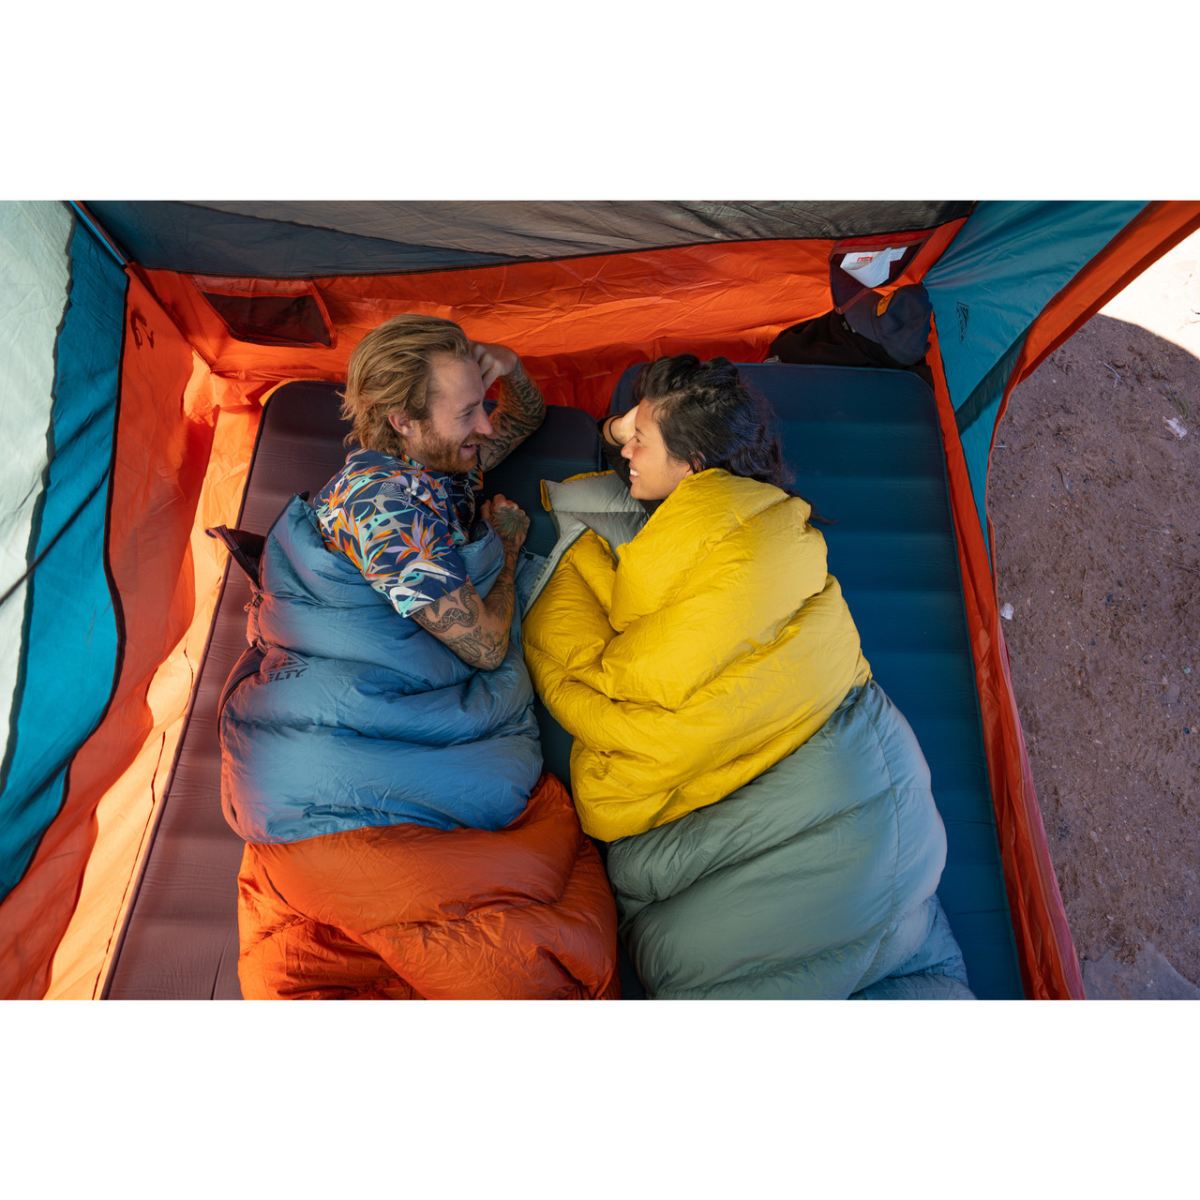 KELTY | DISCOVERY BASECAMP 4